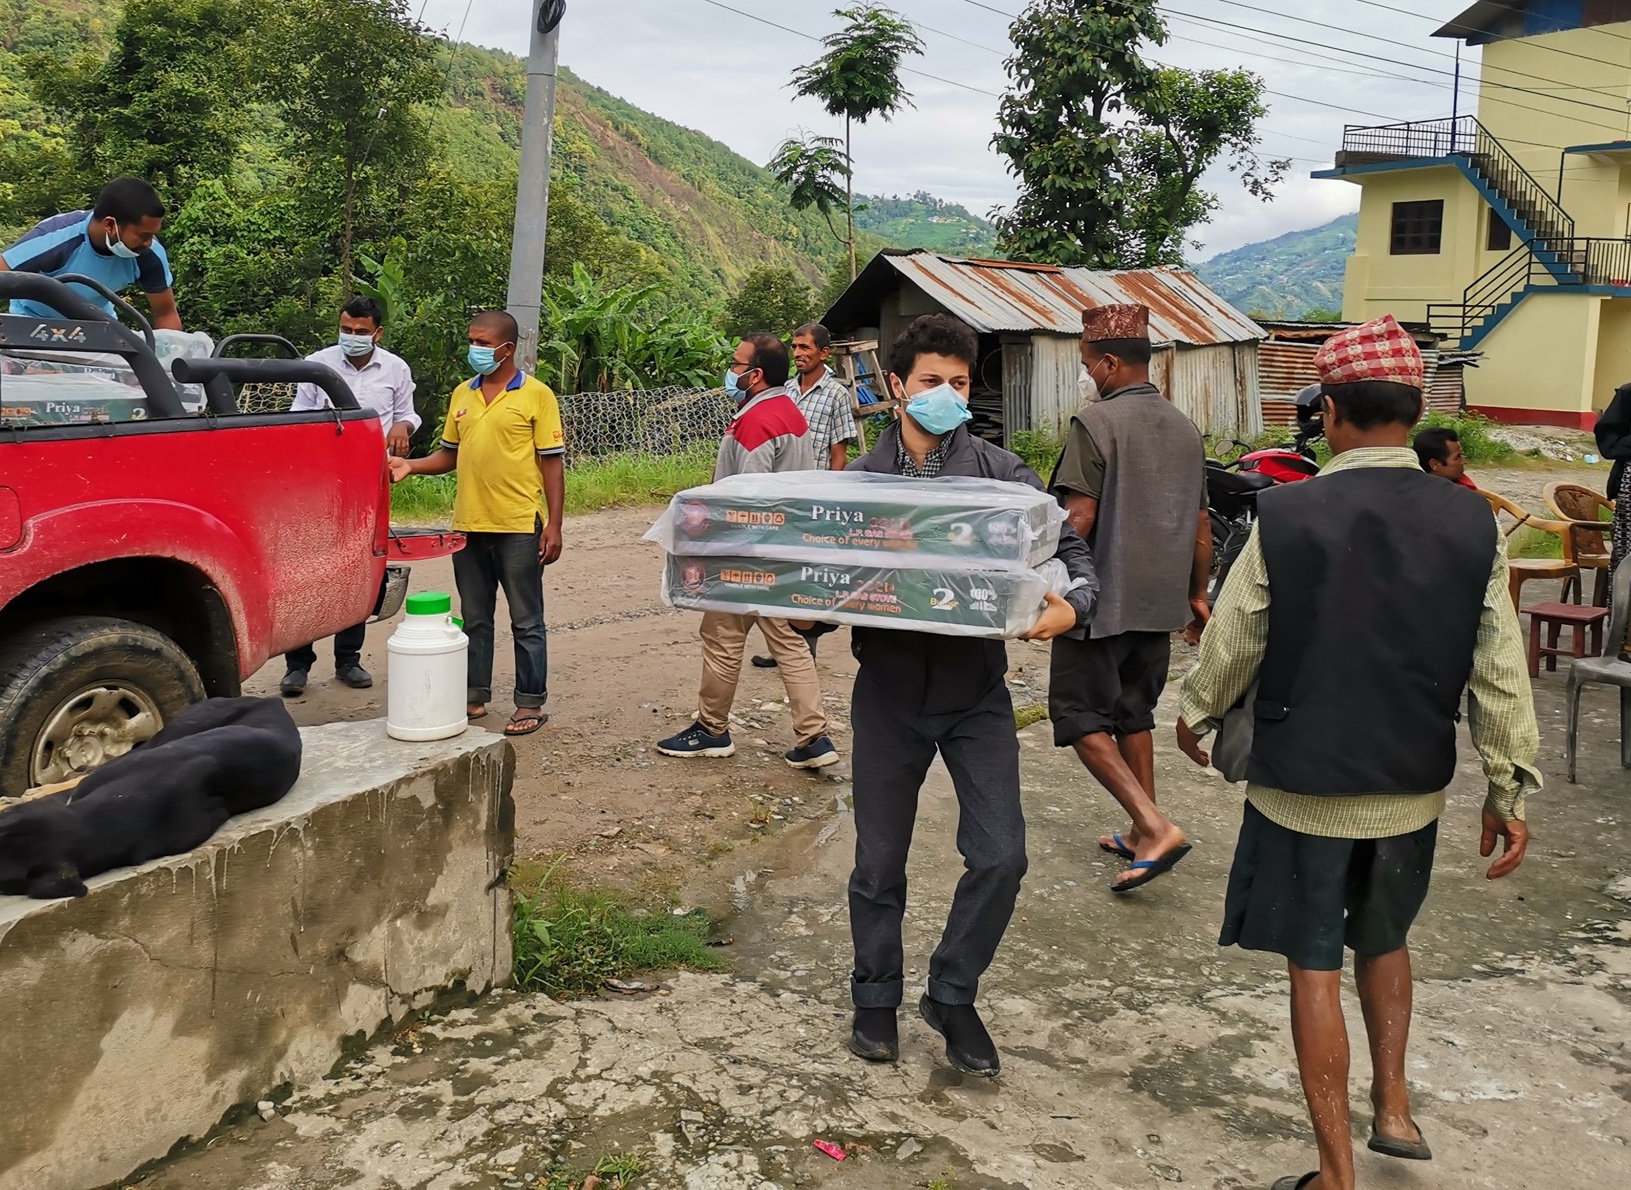 Volunteers supplied stoves, hygiene supplies and food relief to flood victims through Project Samudayik Sewa.